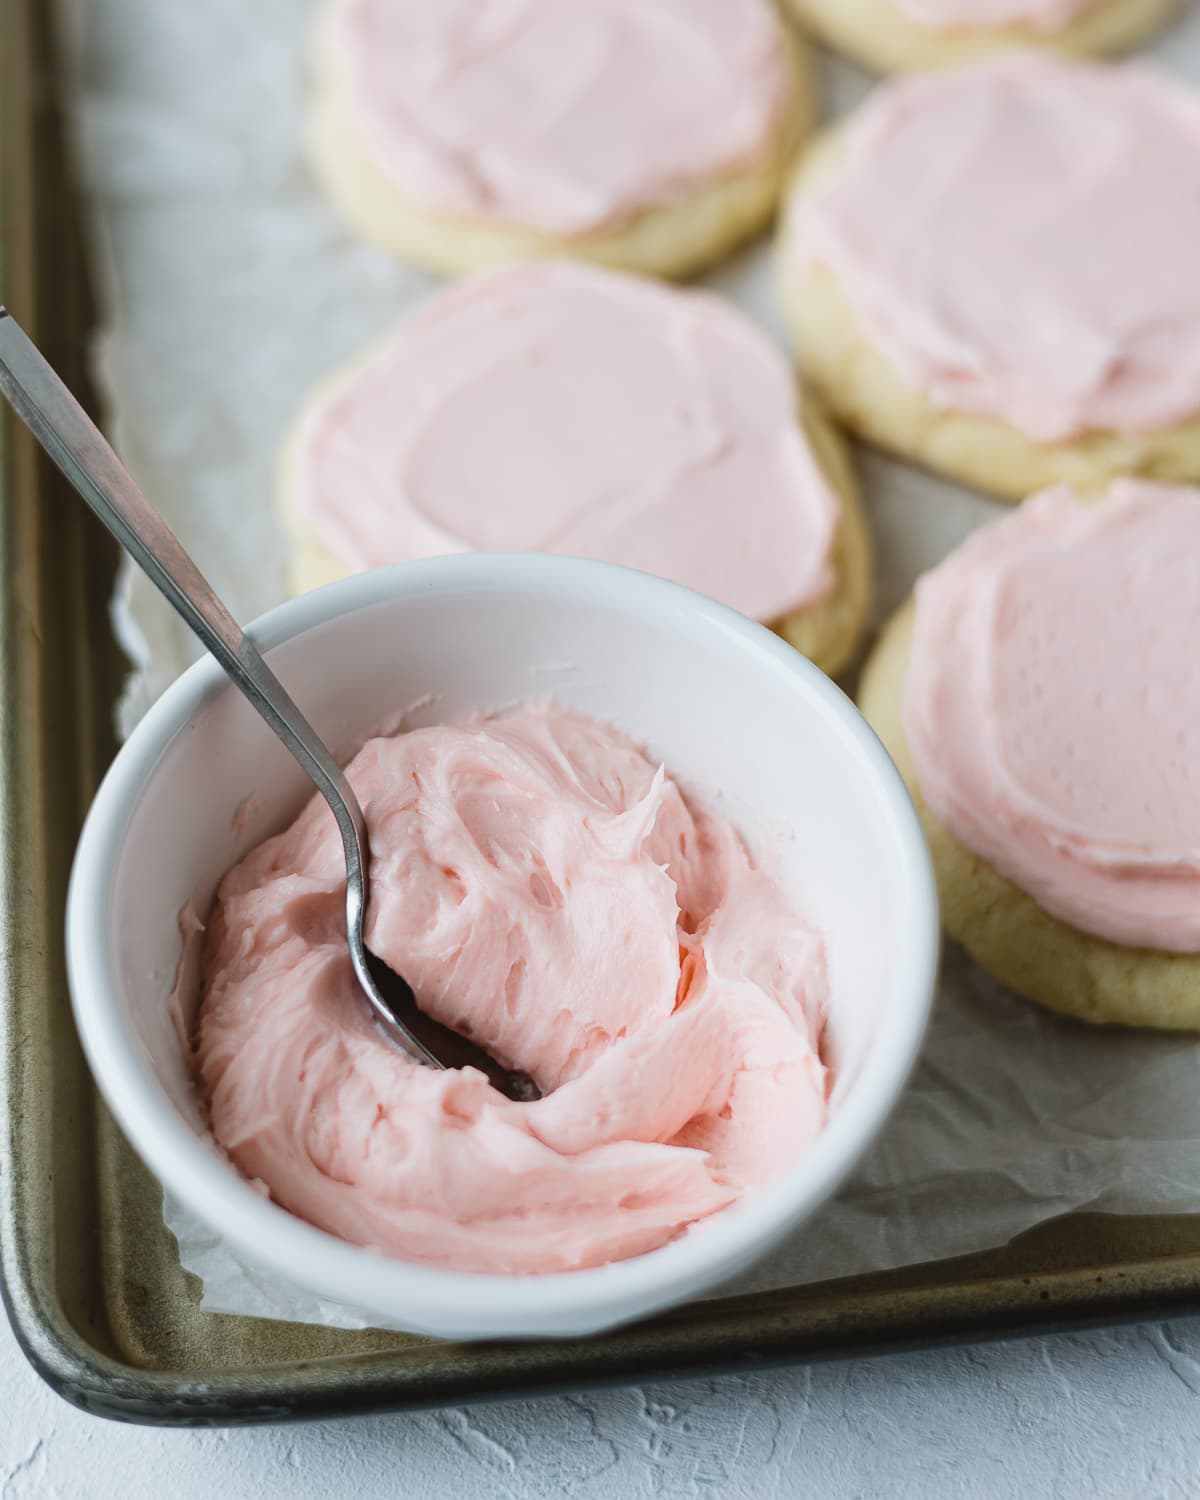 A small bowl filled with pink buttercream and a spoon on a cookie sheet.